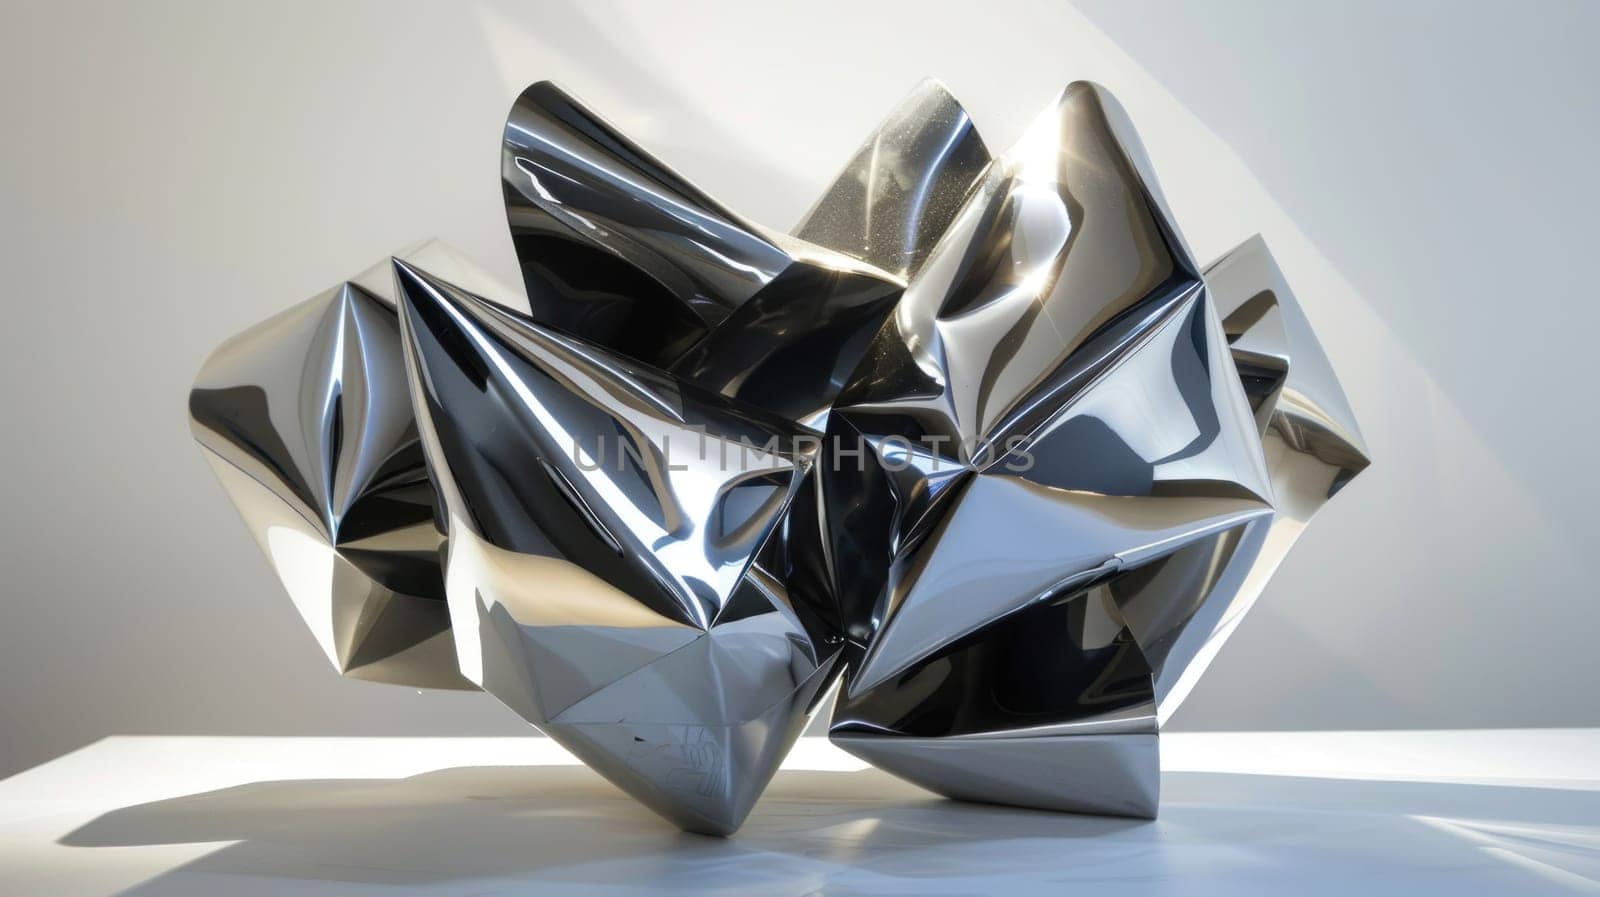 A large piece of art made of metal and paper. The art piece is made of many different shapes and sizes, and it looks like a sculpture